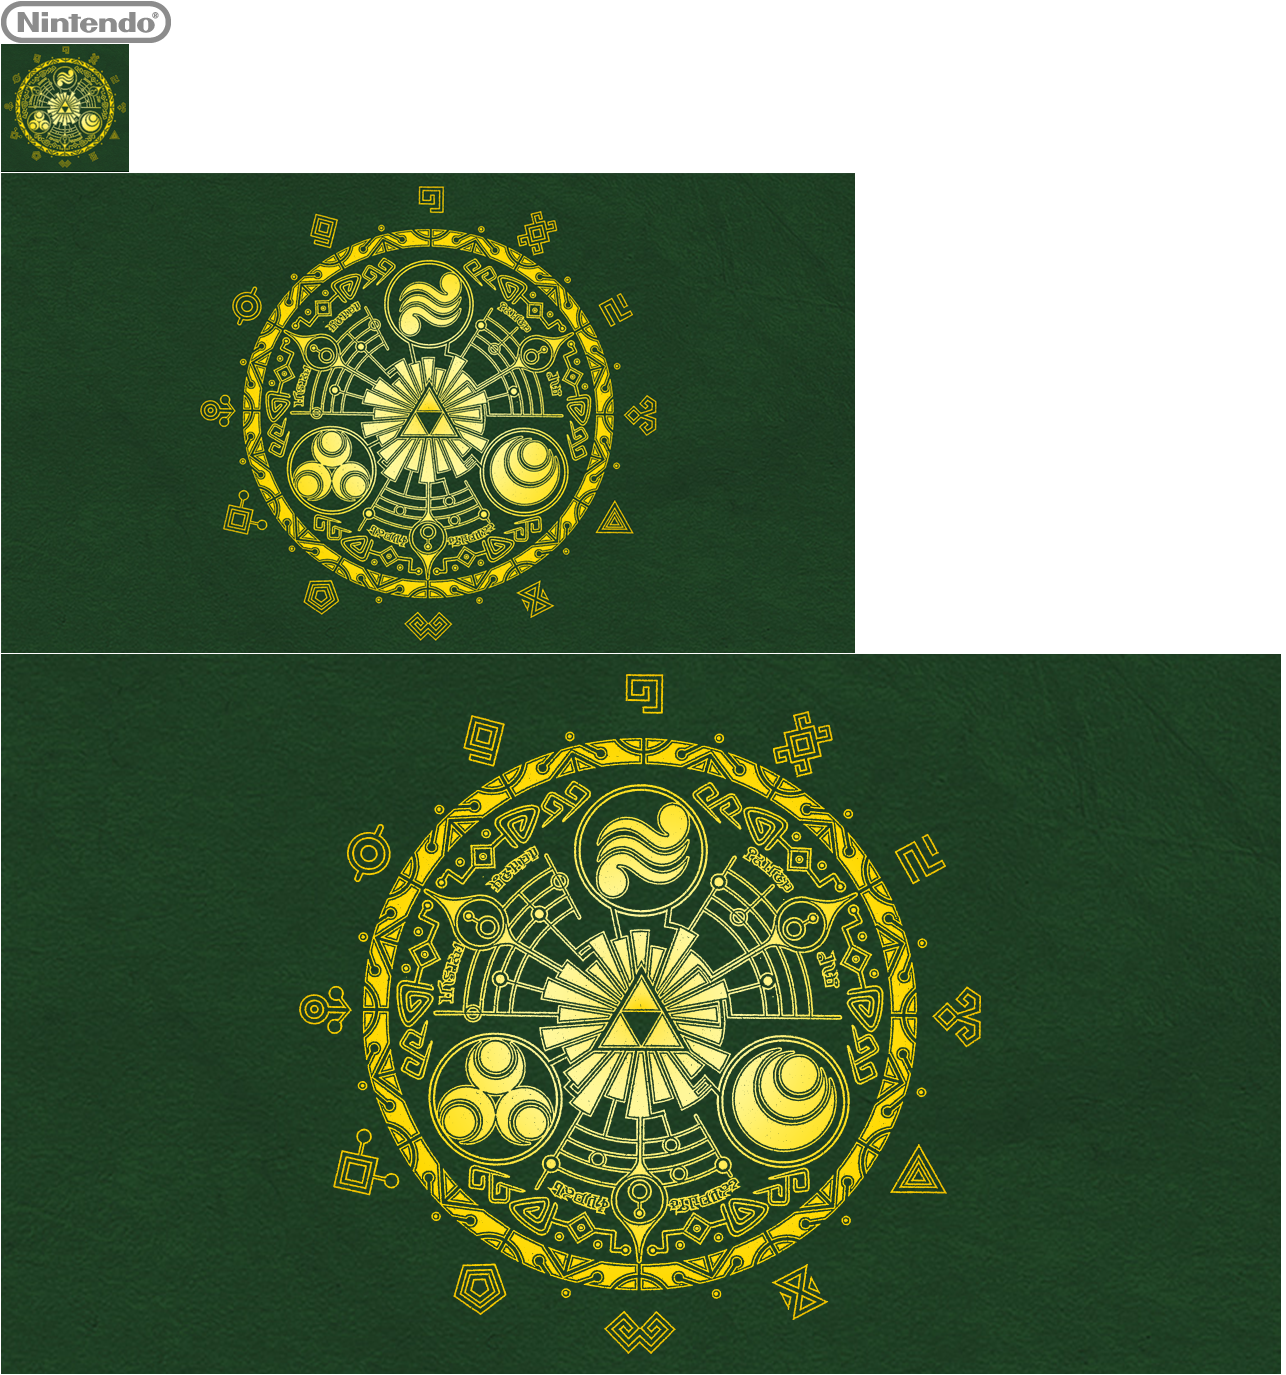 The Legend of Zelda: Hyrule Historia - HOME Menu Icon & Banners